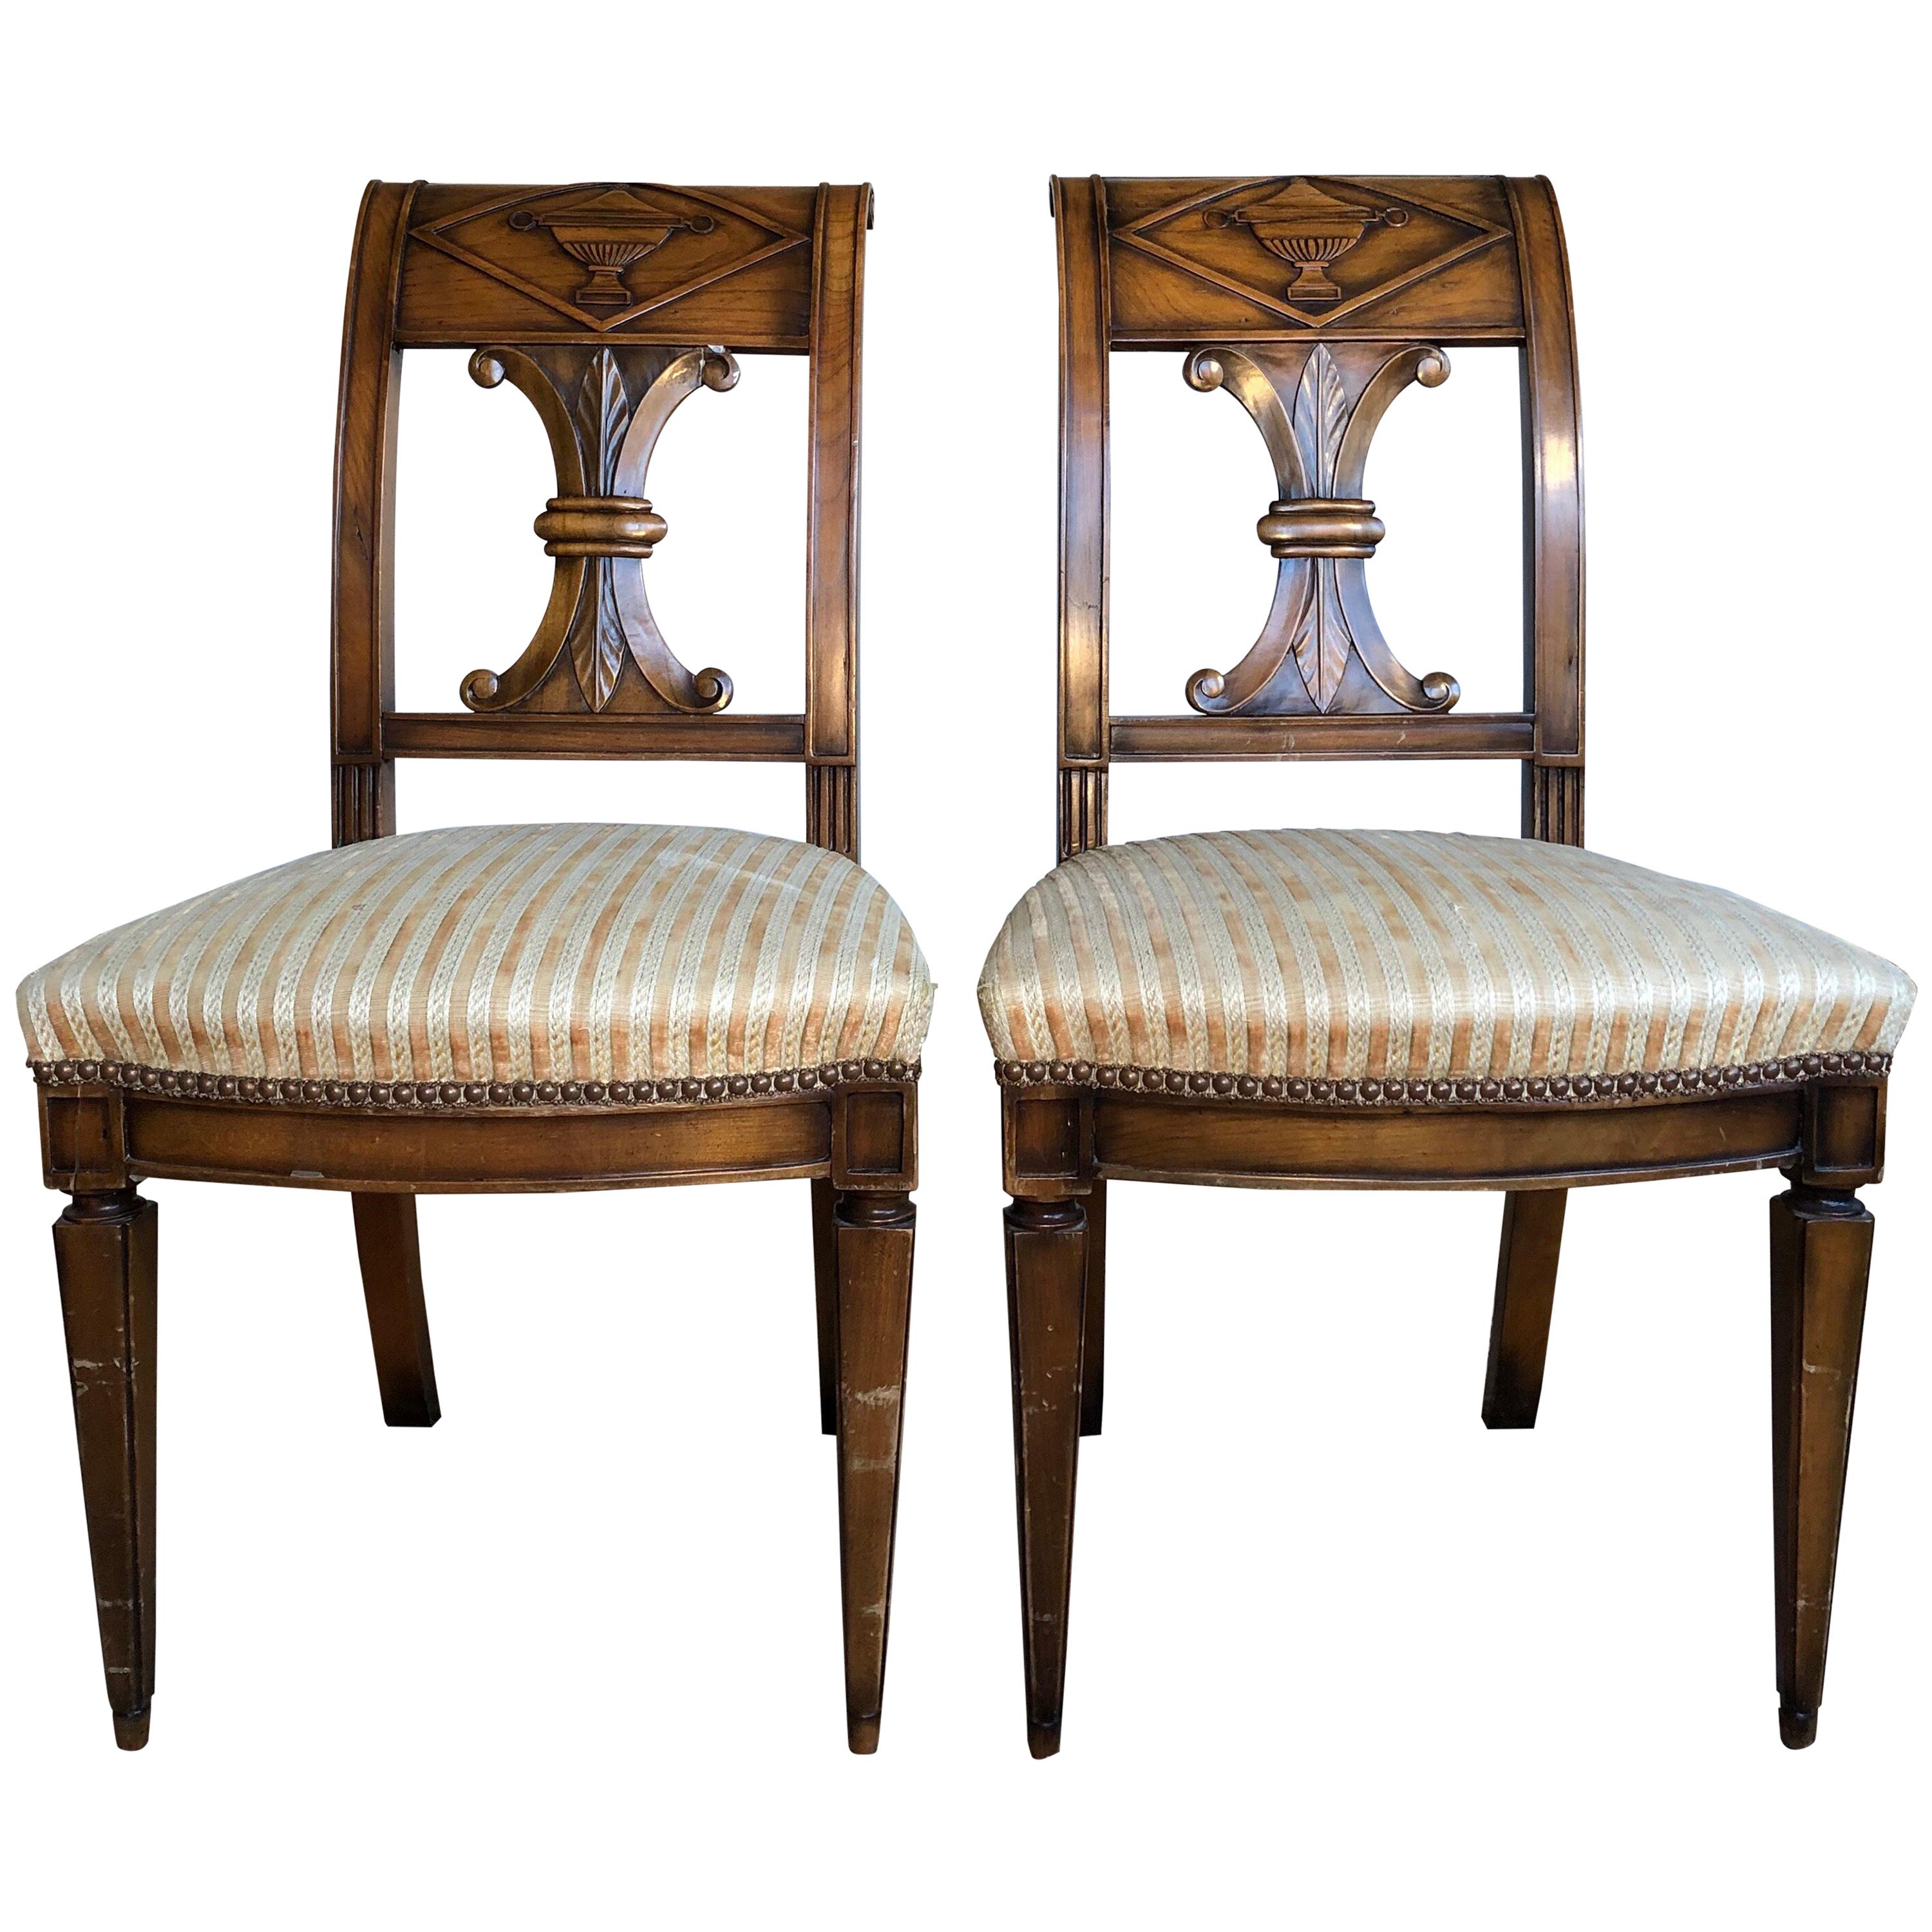 SALE Pair of Wooden Neoclassical Empire Side Chairs Biedermeier ON SALE 